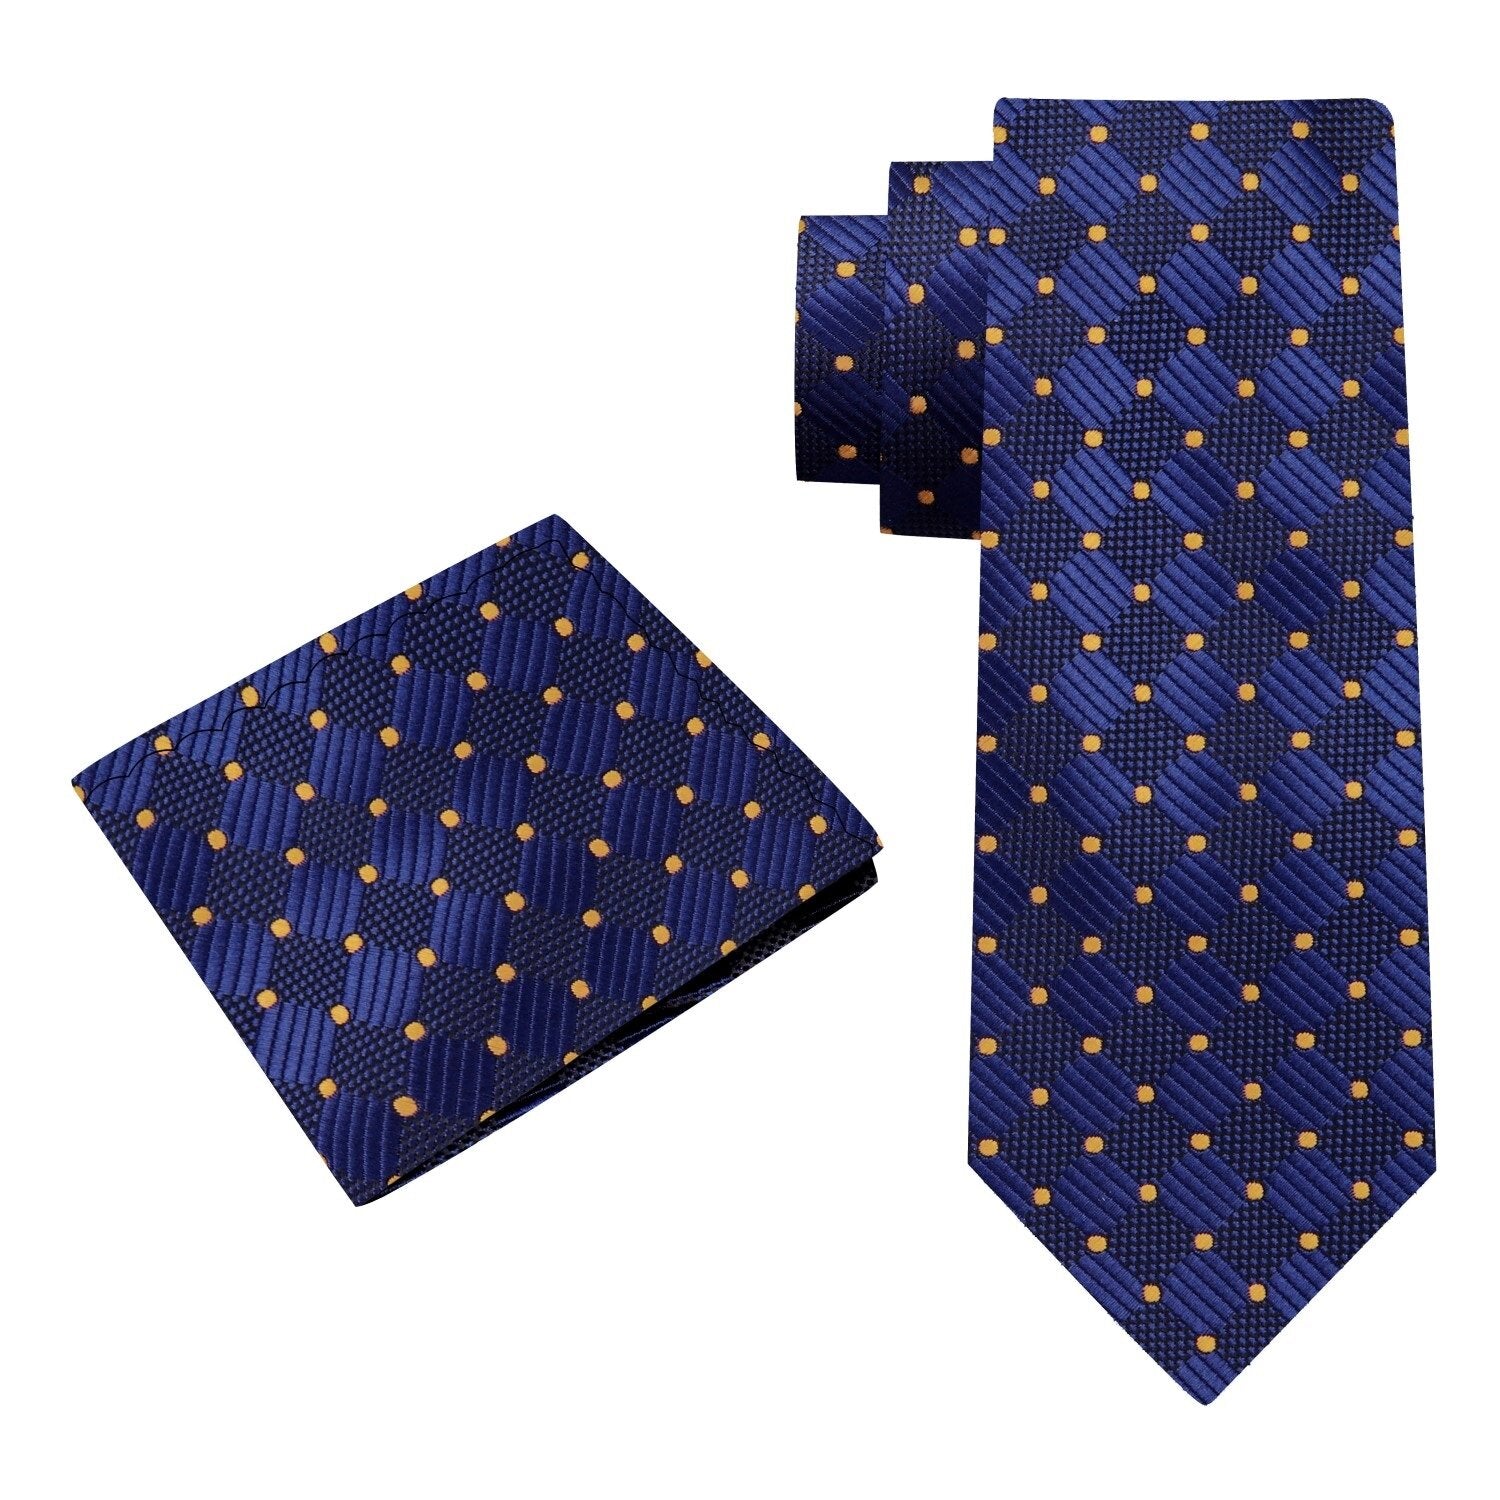 Alt View: A Dark Blue Geometric Diamond With Small Dots Pattern Silk Necktie With Matching Pocket Square